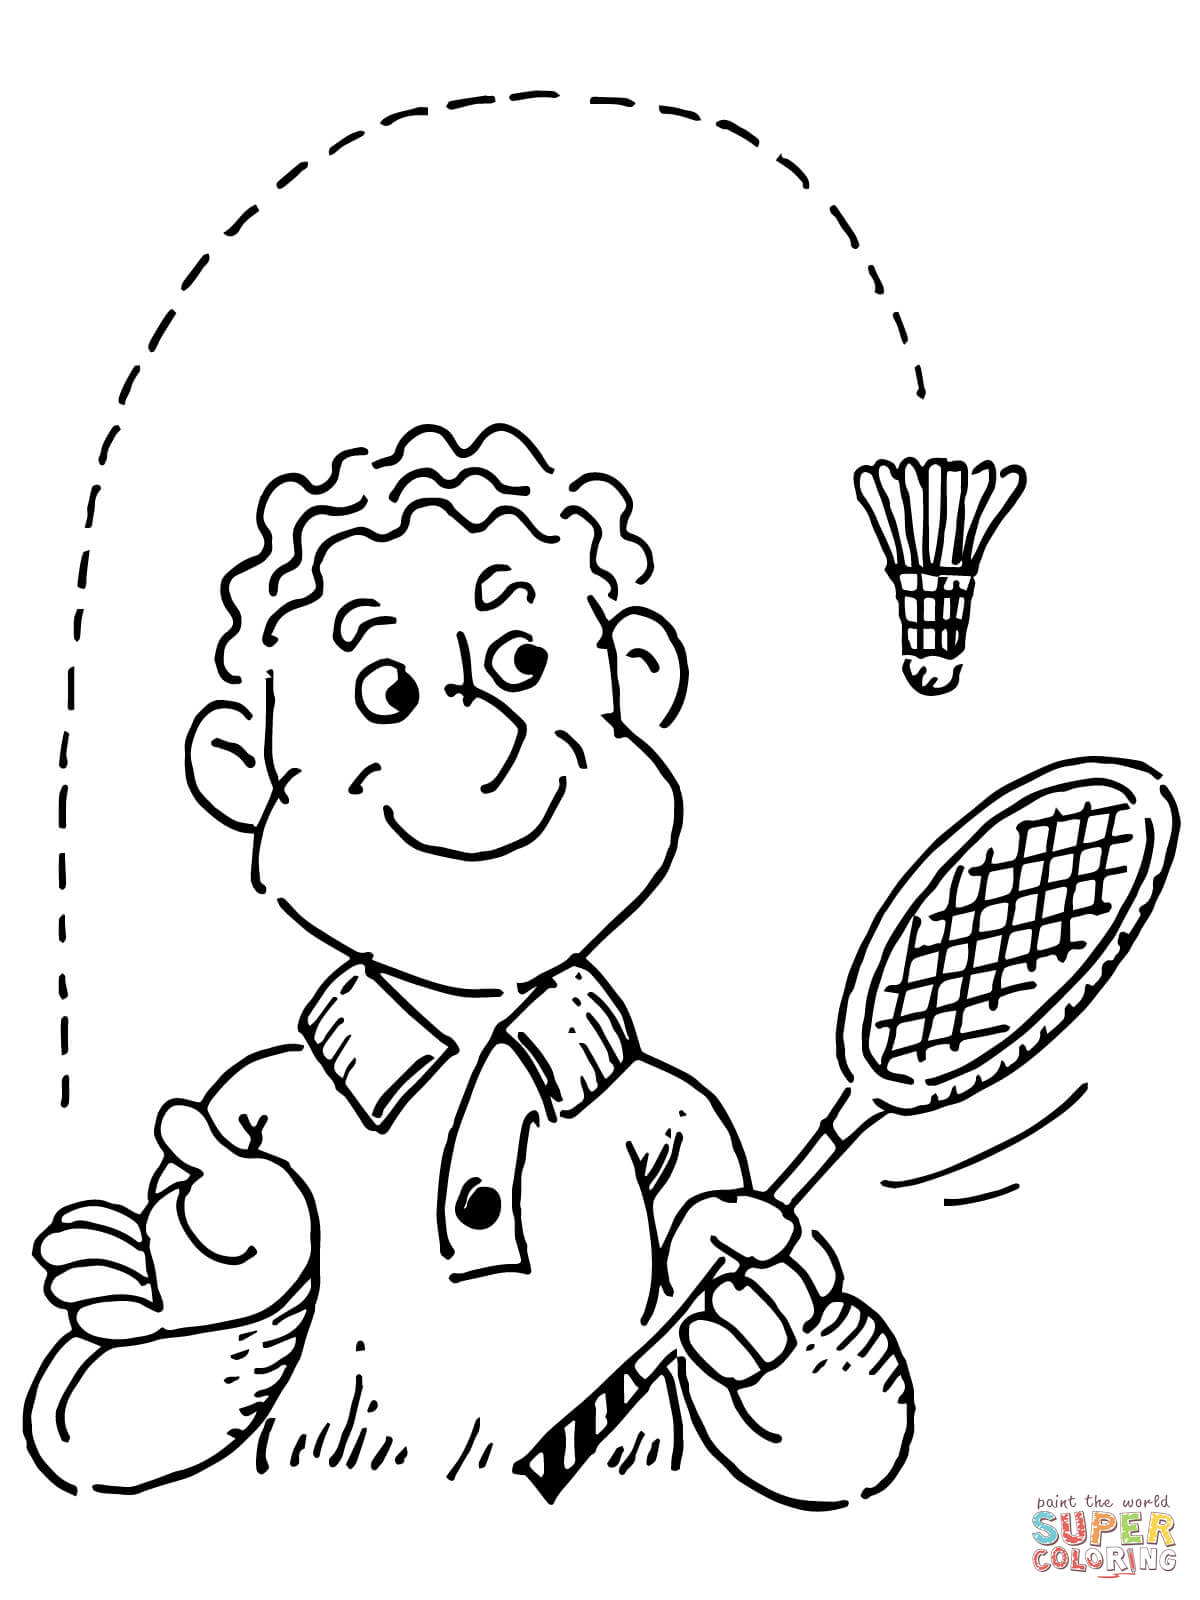 Badminton Player coloring page | Free Printable Coloring Pages